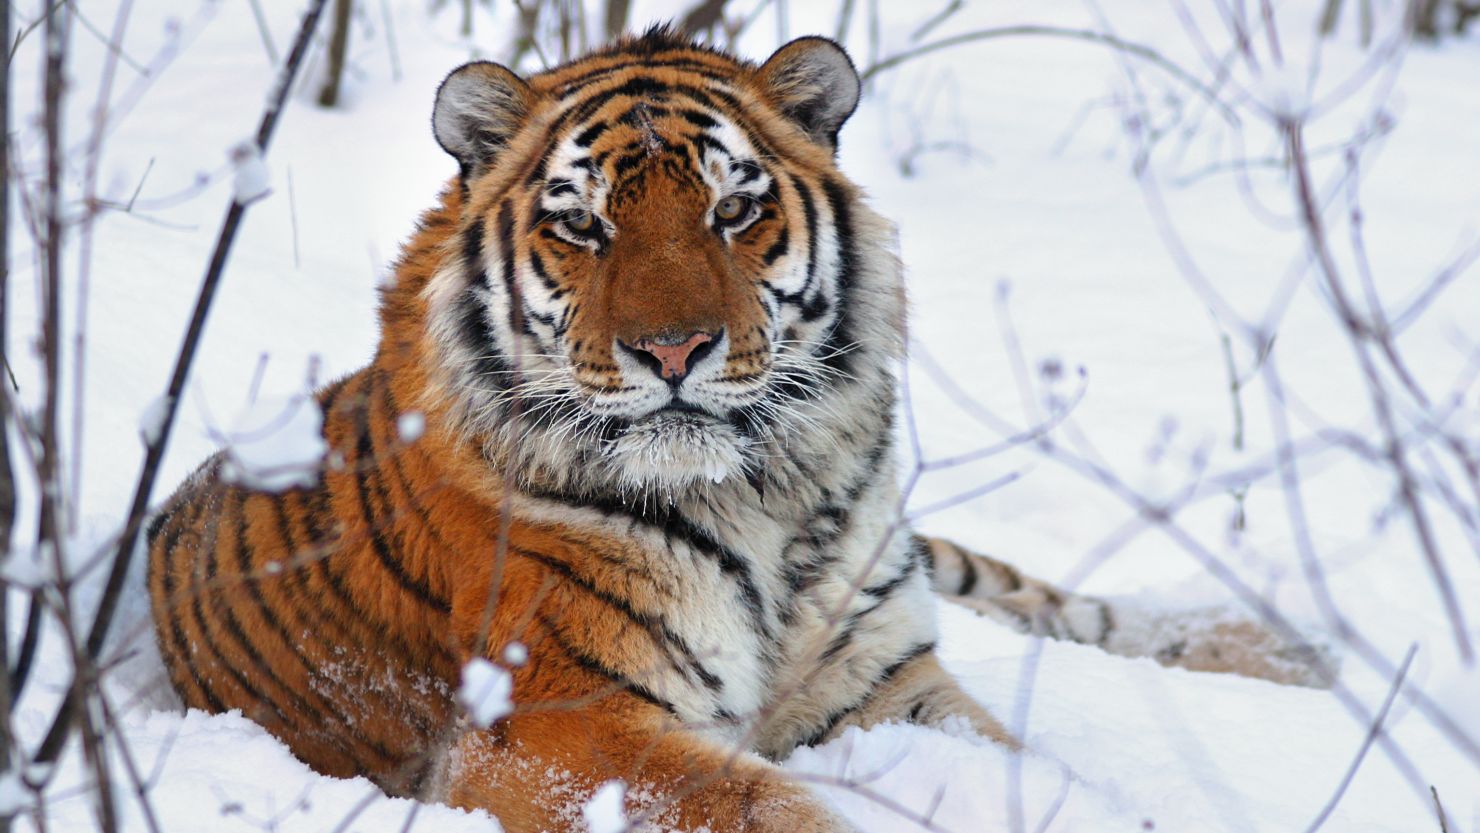 BENGAL TIGER VS SIBERIAN TIGER - Who Is The Strongest? 